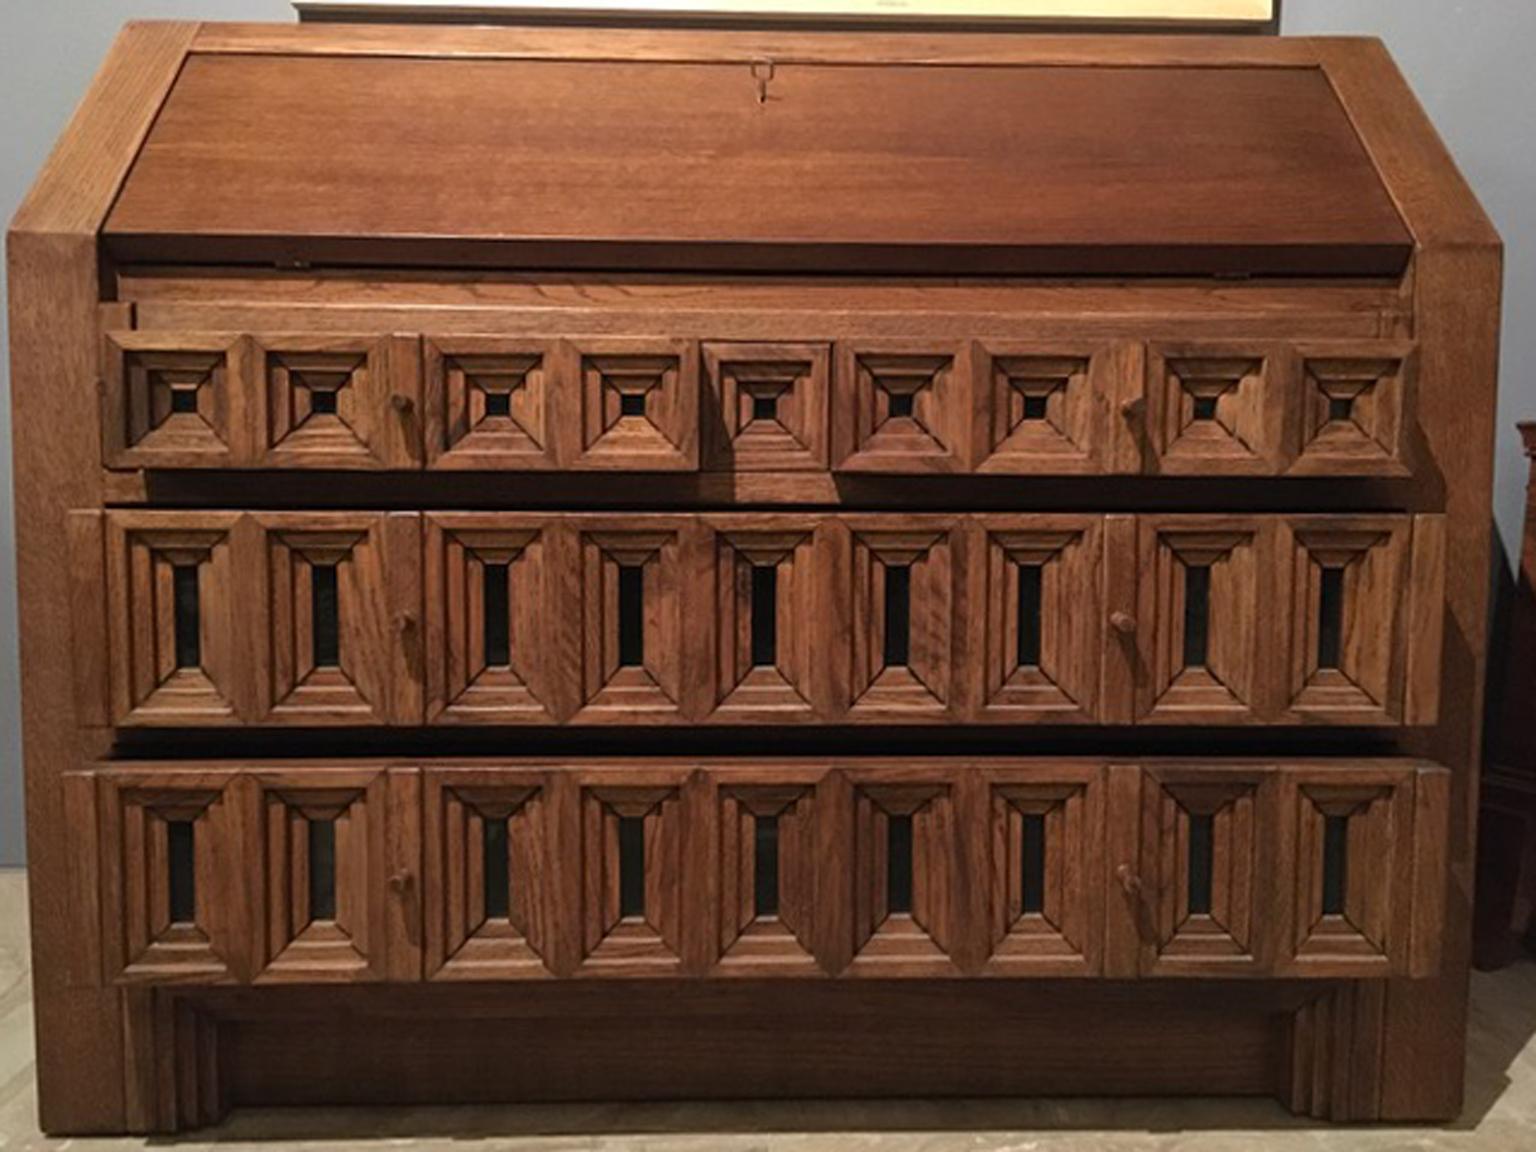 1970 Officina Rivadossi Oak Desk or Cabinet with Drawers in Brutalist Style 4